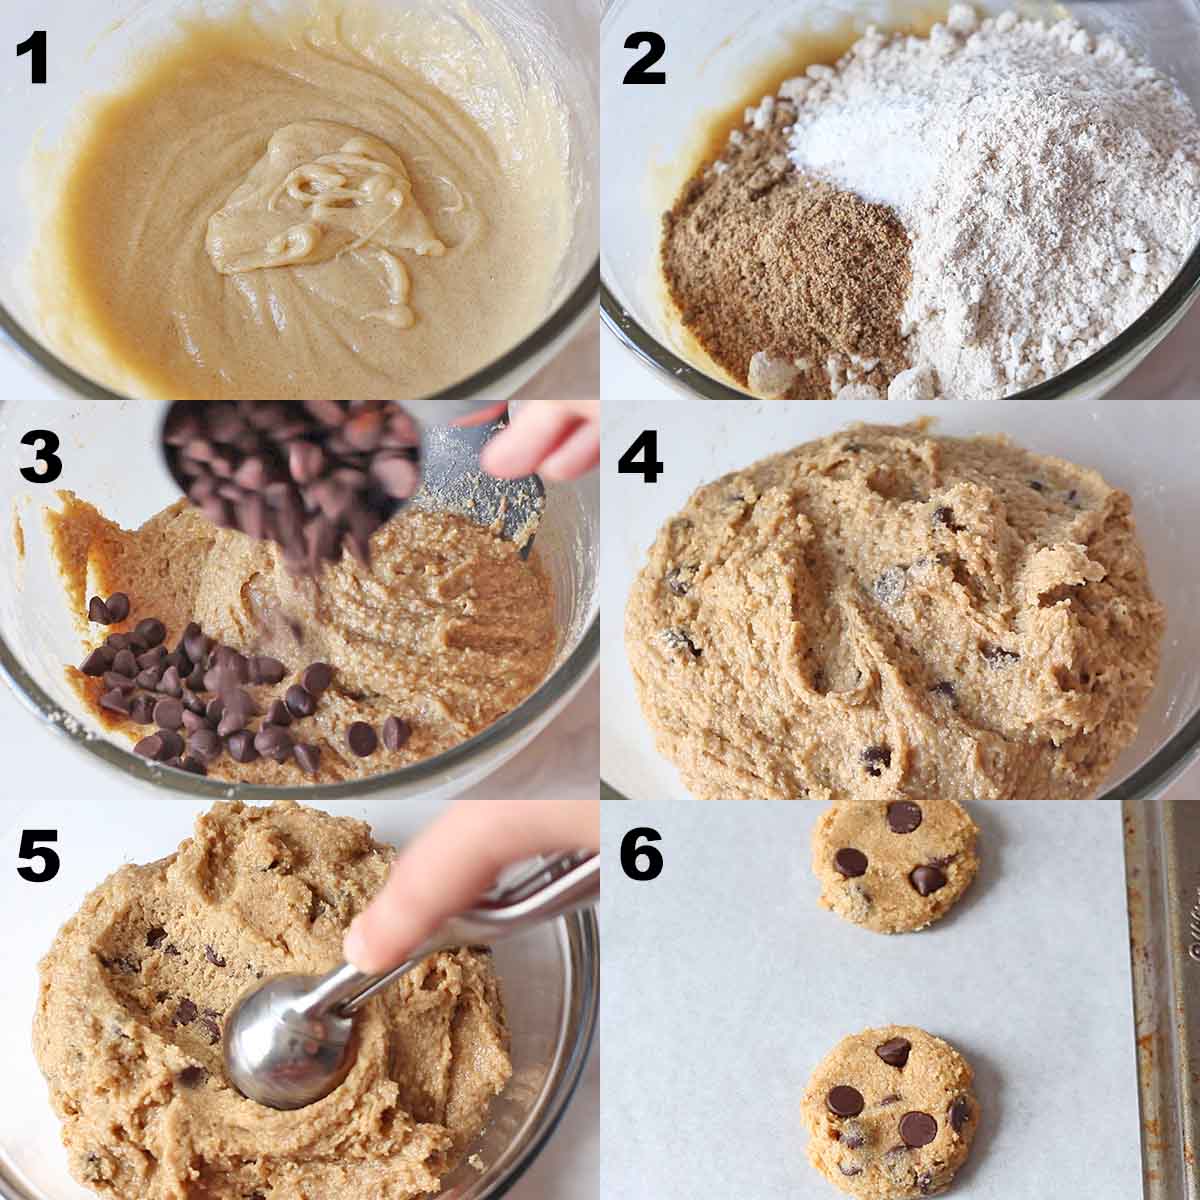 How to make oat flour chocolate chip cookies in 6 steps